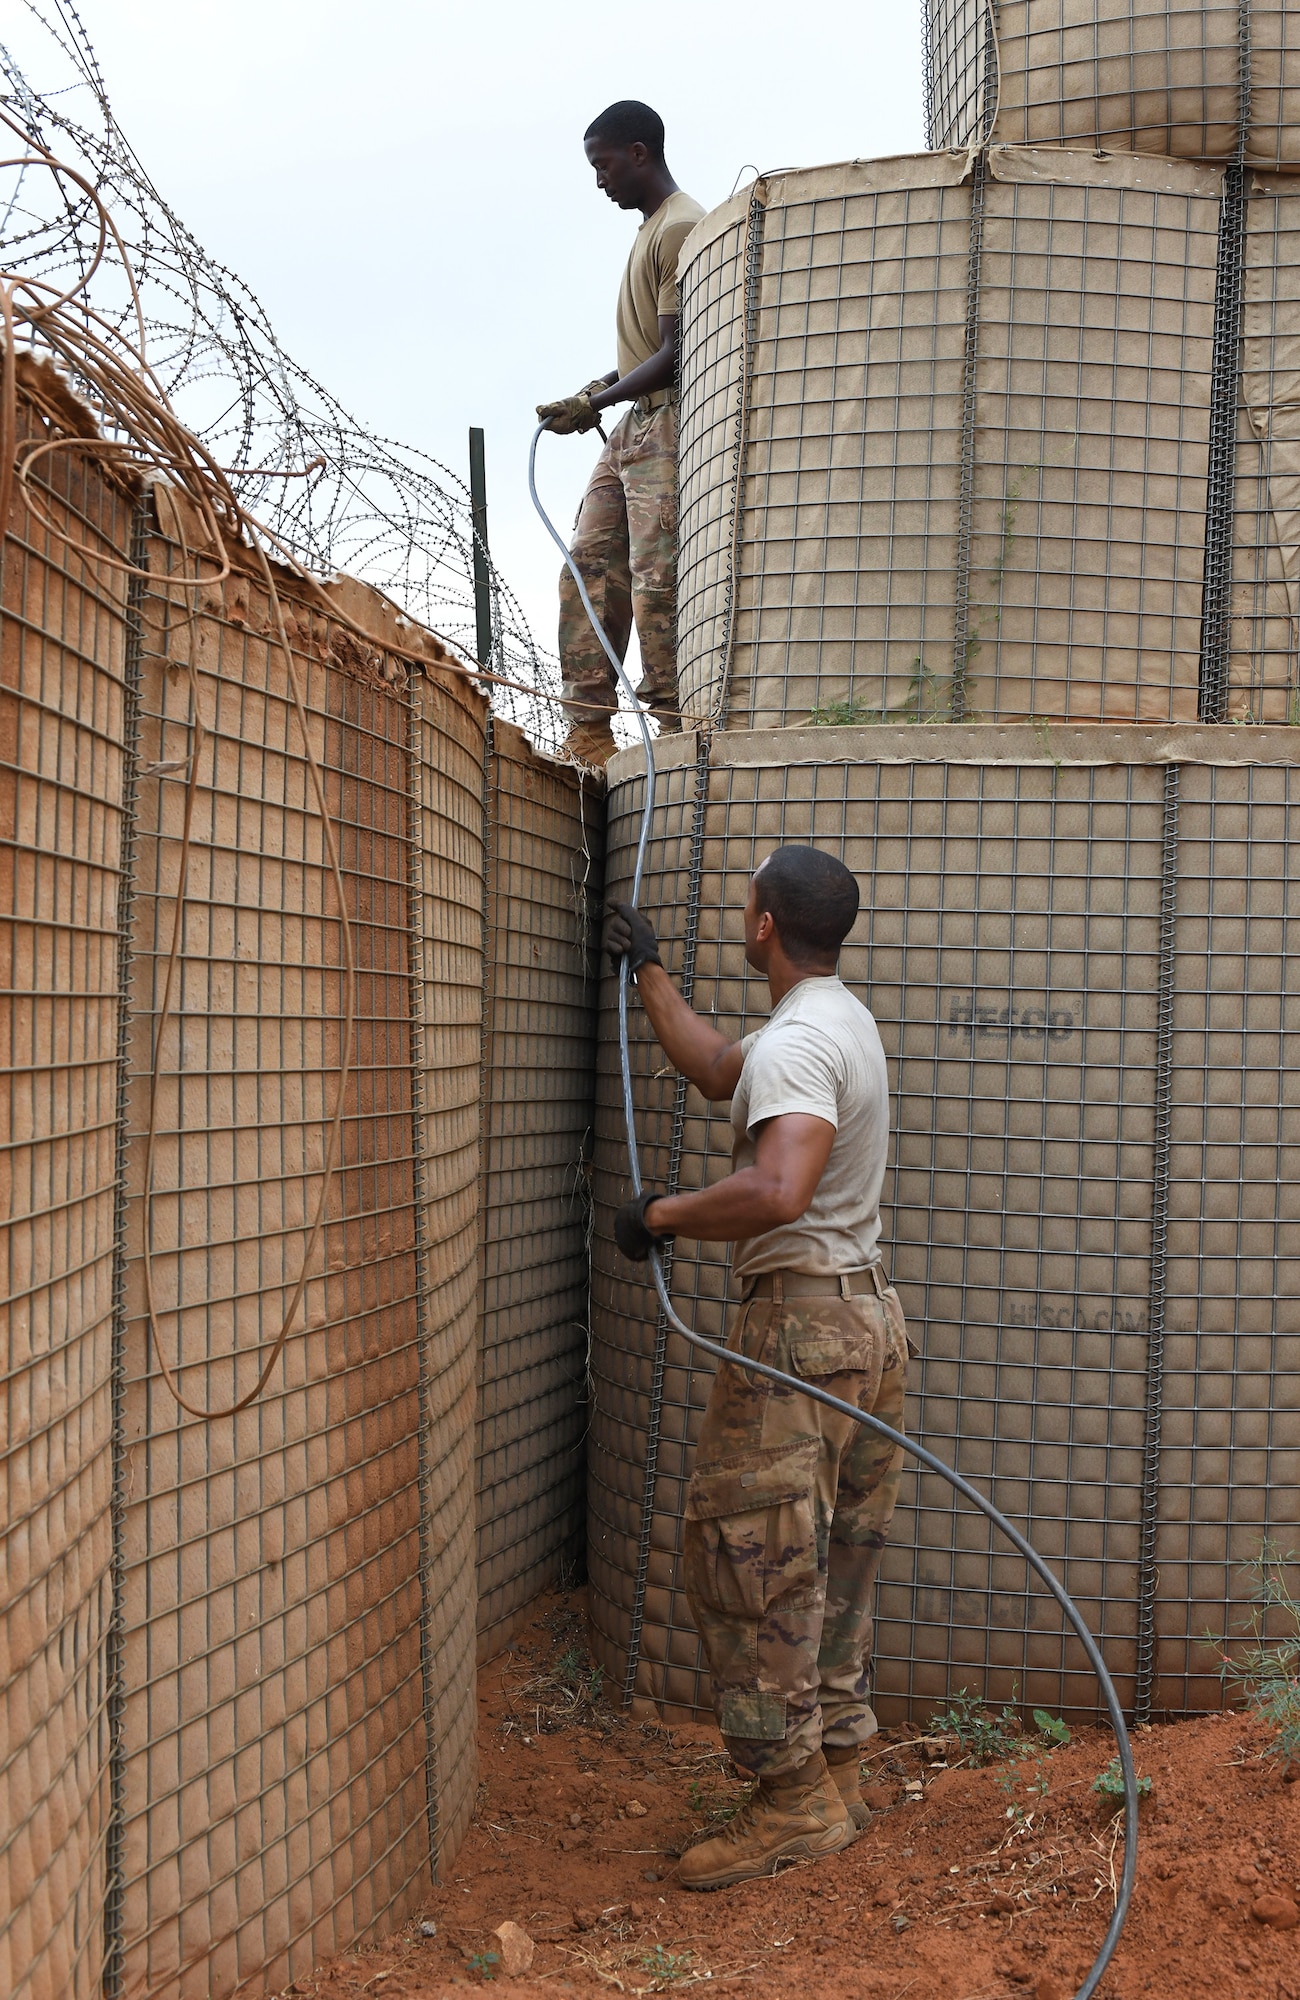 U.S. Air Force Tech. Sgt. Guillermo Cajigas, 768th Expeditionary Air Base Squadron Power Production and Electrical Systems section lead (bottom), and SSgt Jeremy Davis, 768th EABS Electrical Systems craftsman (top), run a cable for perimeter lighting at Nigerien Air Base 101, Niamey, Niger, Oct. 10, 2019. The cable was rerouted to make way for the foundation of the base’s new gym facilities. (U.S. Air Force photo by Staff Sgt. Alex Fox Echols III)